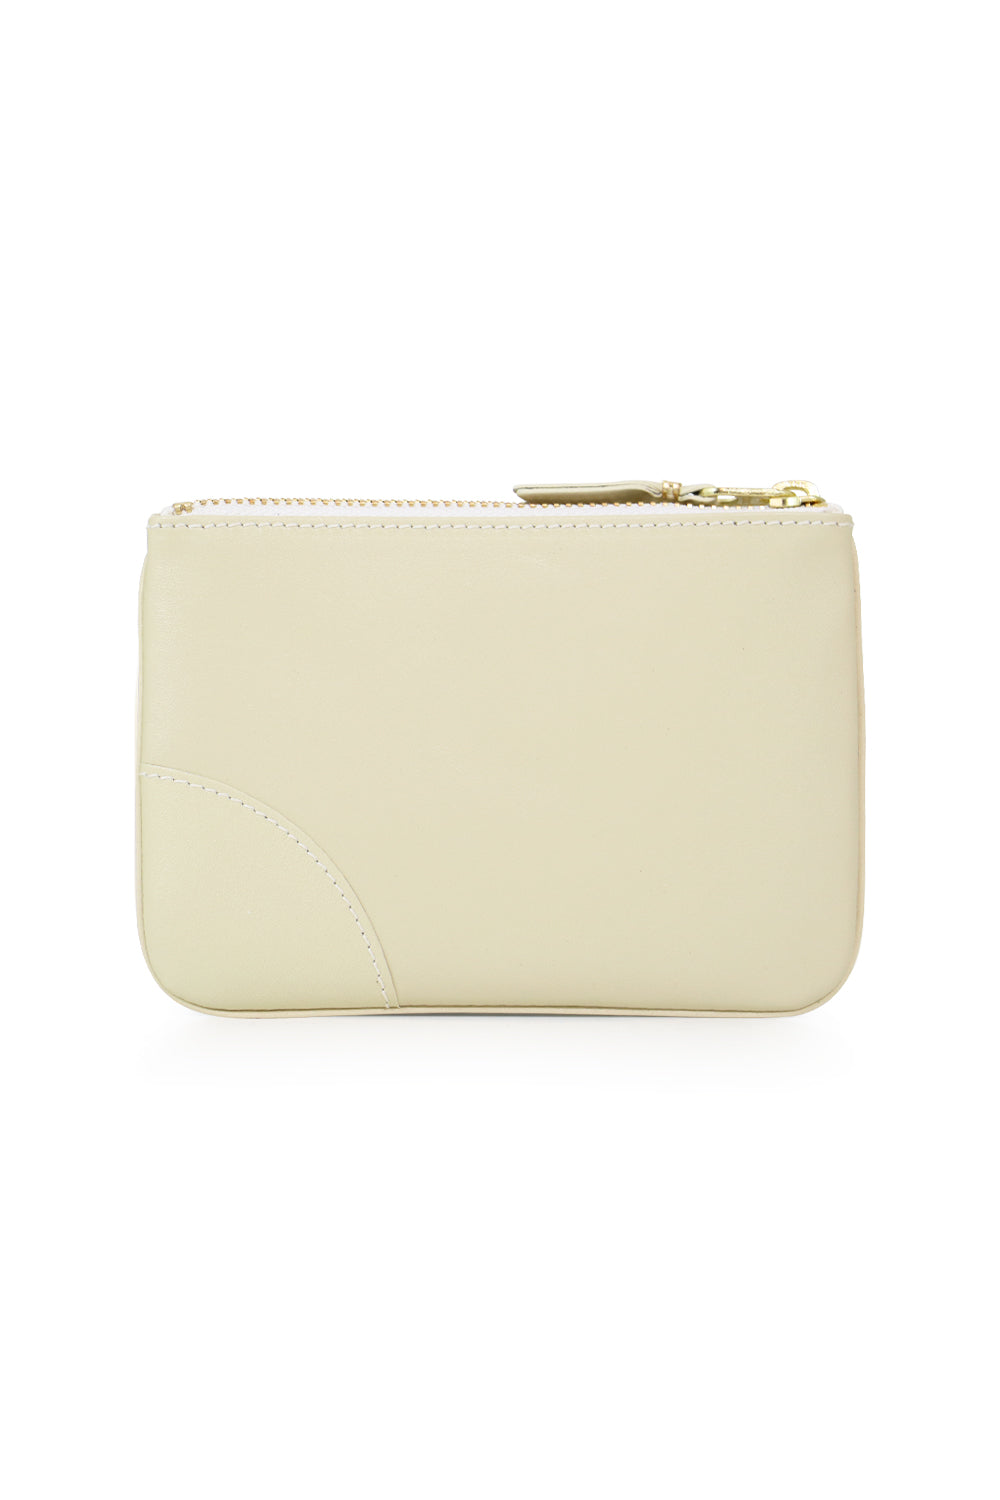 COMME DES GARCONS BAGS WHITE SMALL CLASSIC LEATHER POUCH | OFF WHITE